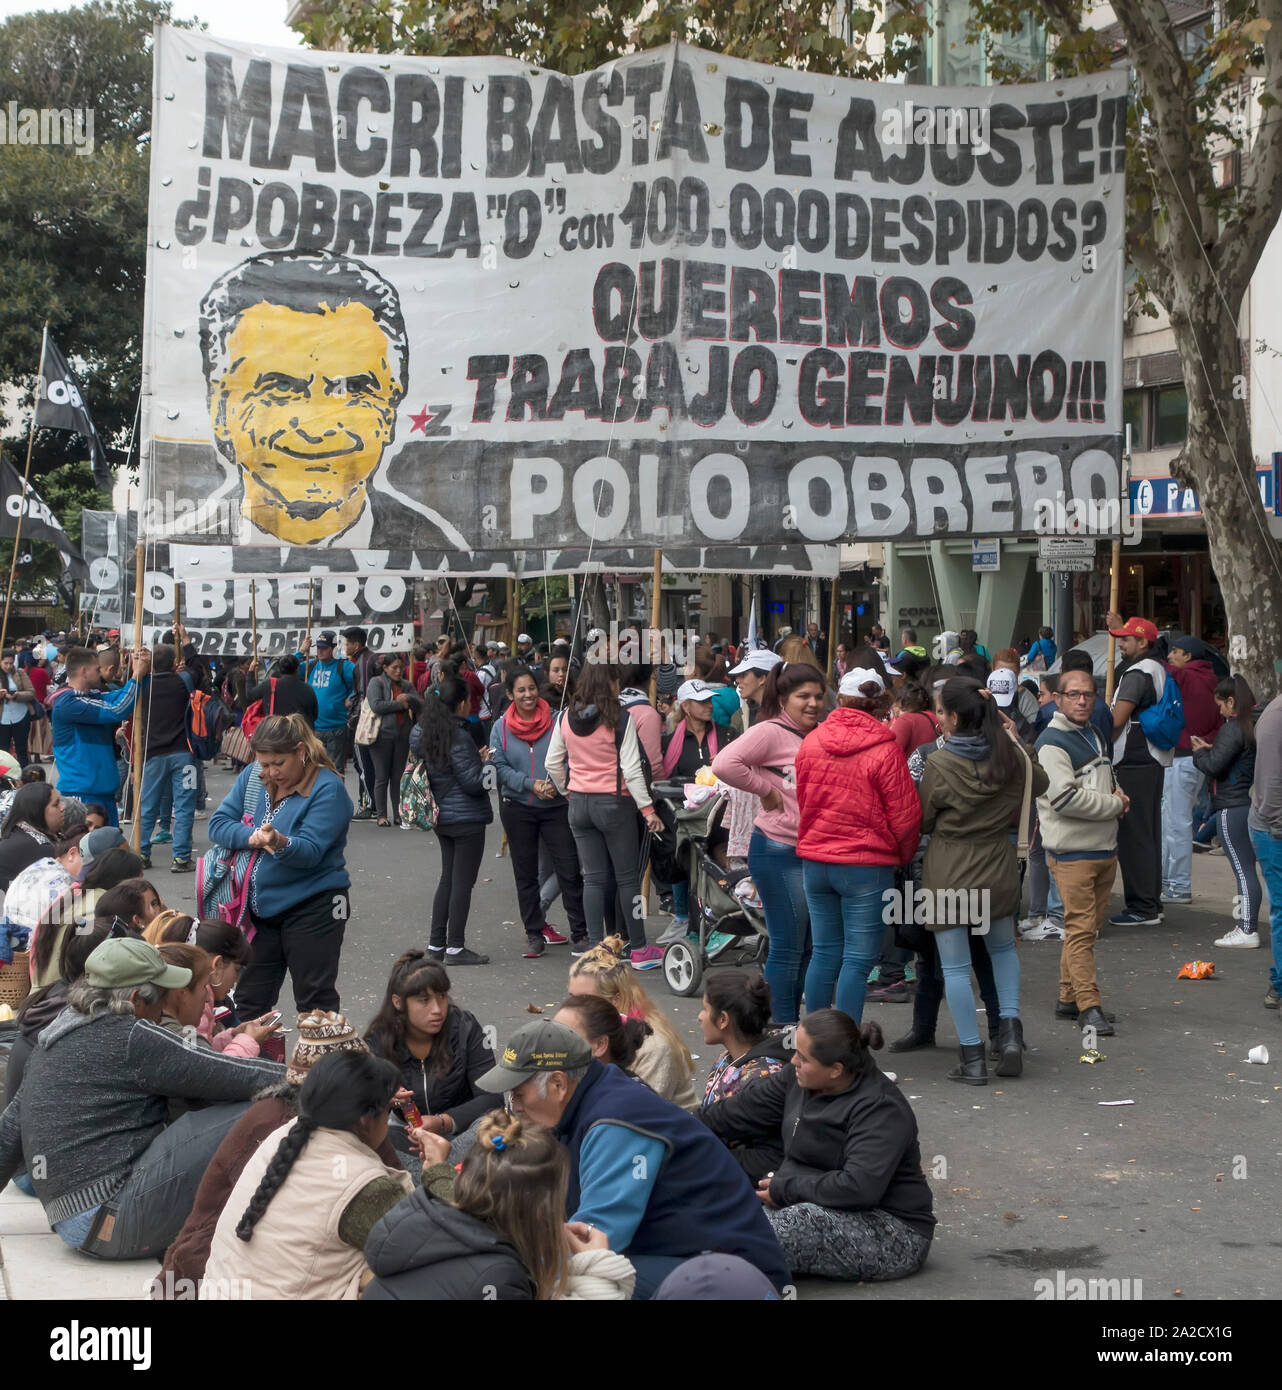 demonstrators protest in Buenos Aires, Argentina against President Mauricio Macri's austerity policies Stock Photo